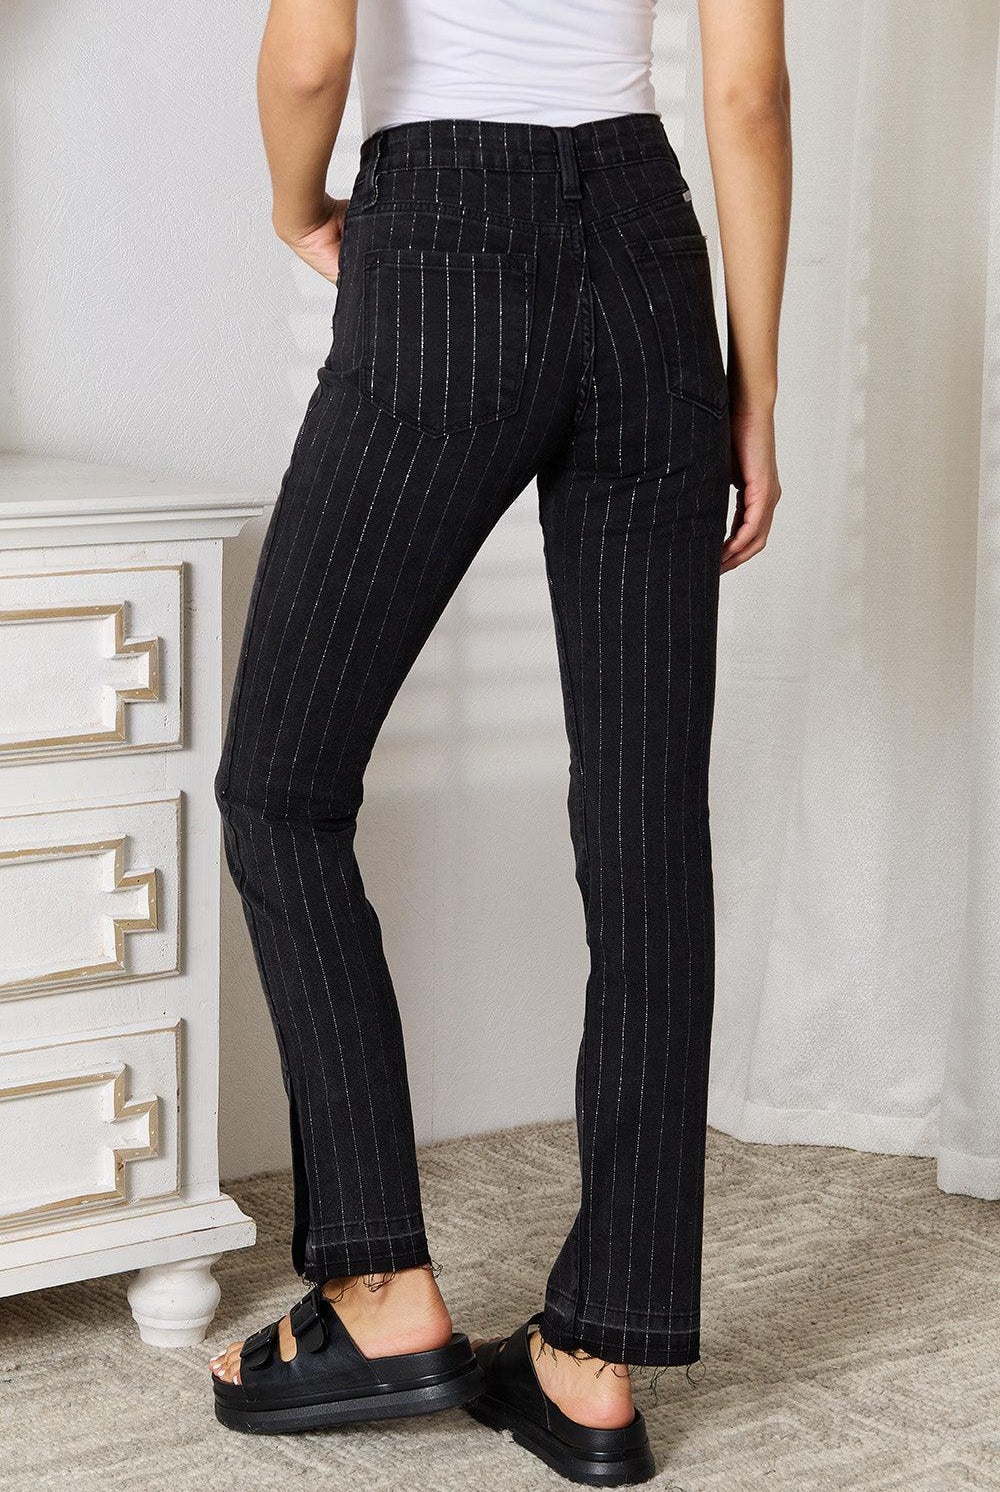 Women's Pants Kancan Striped Pants with Pockets